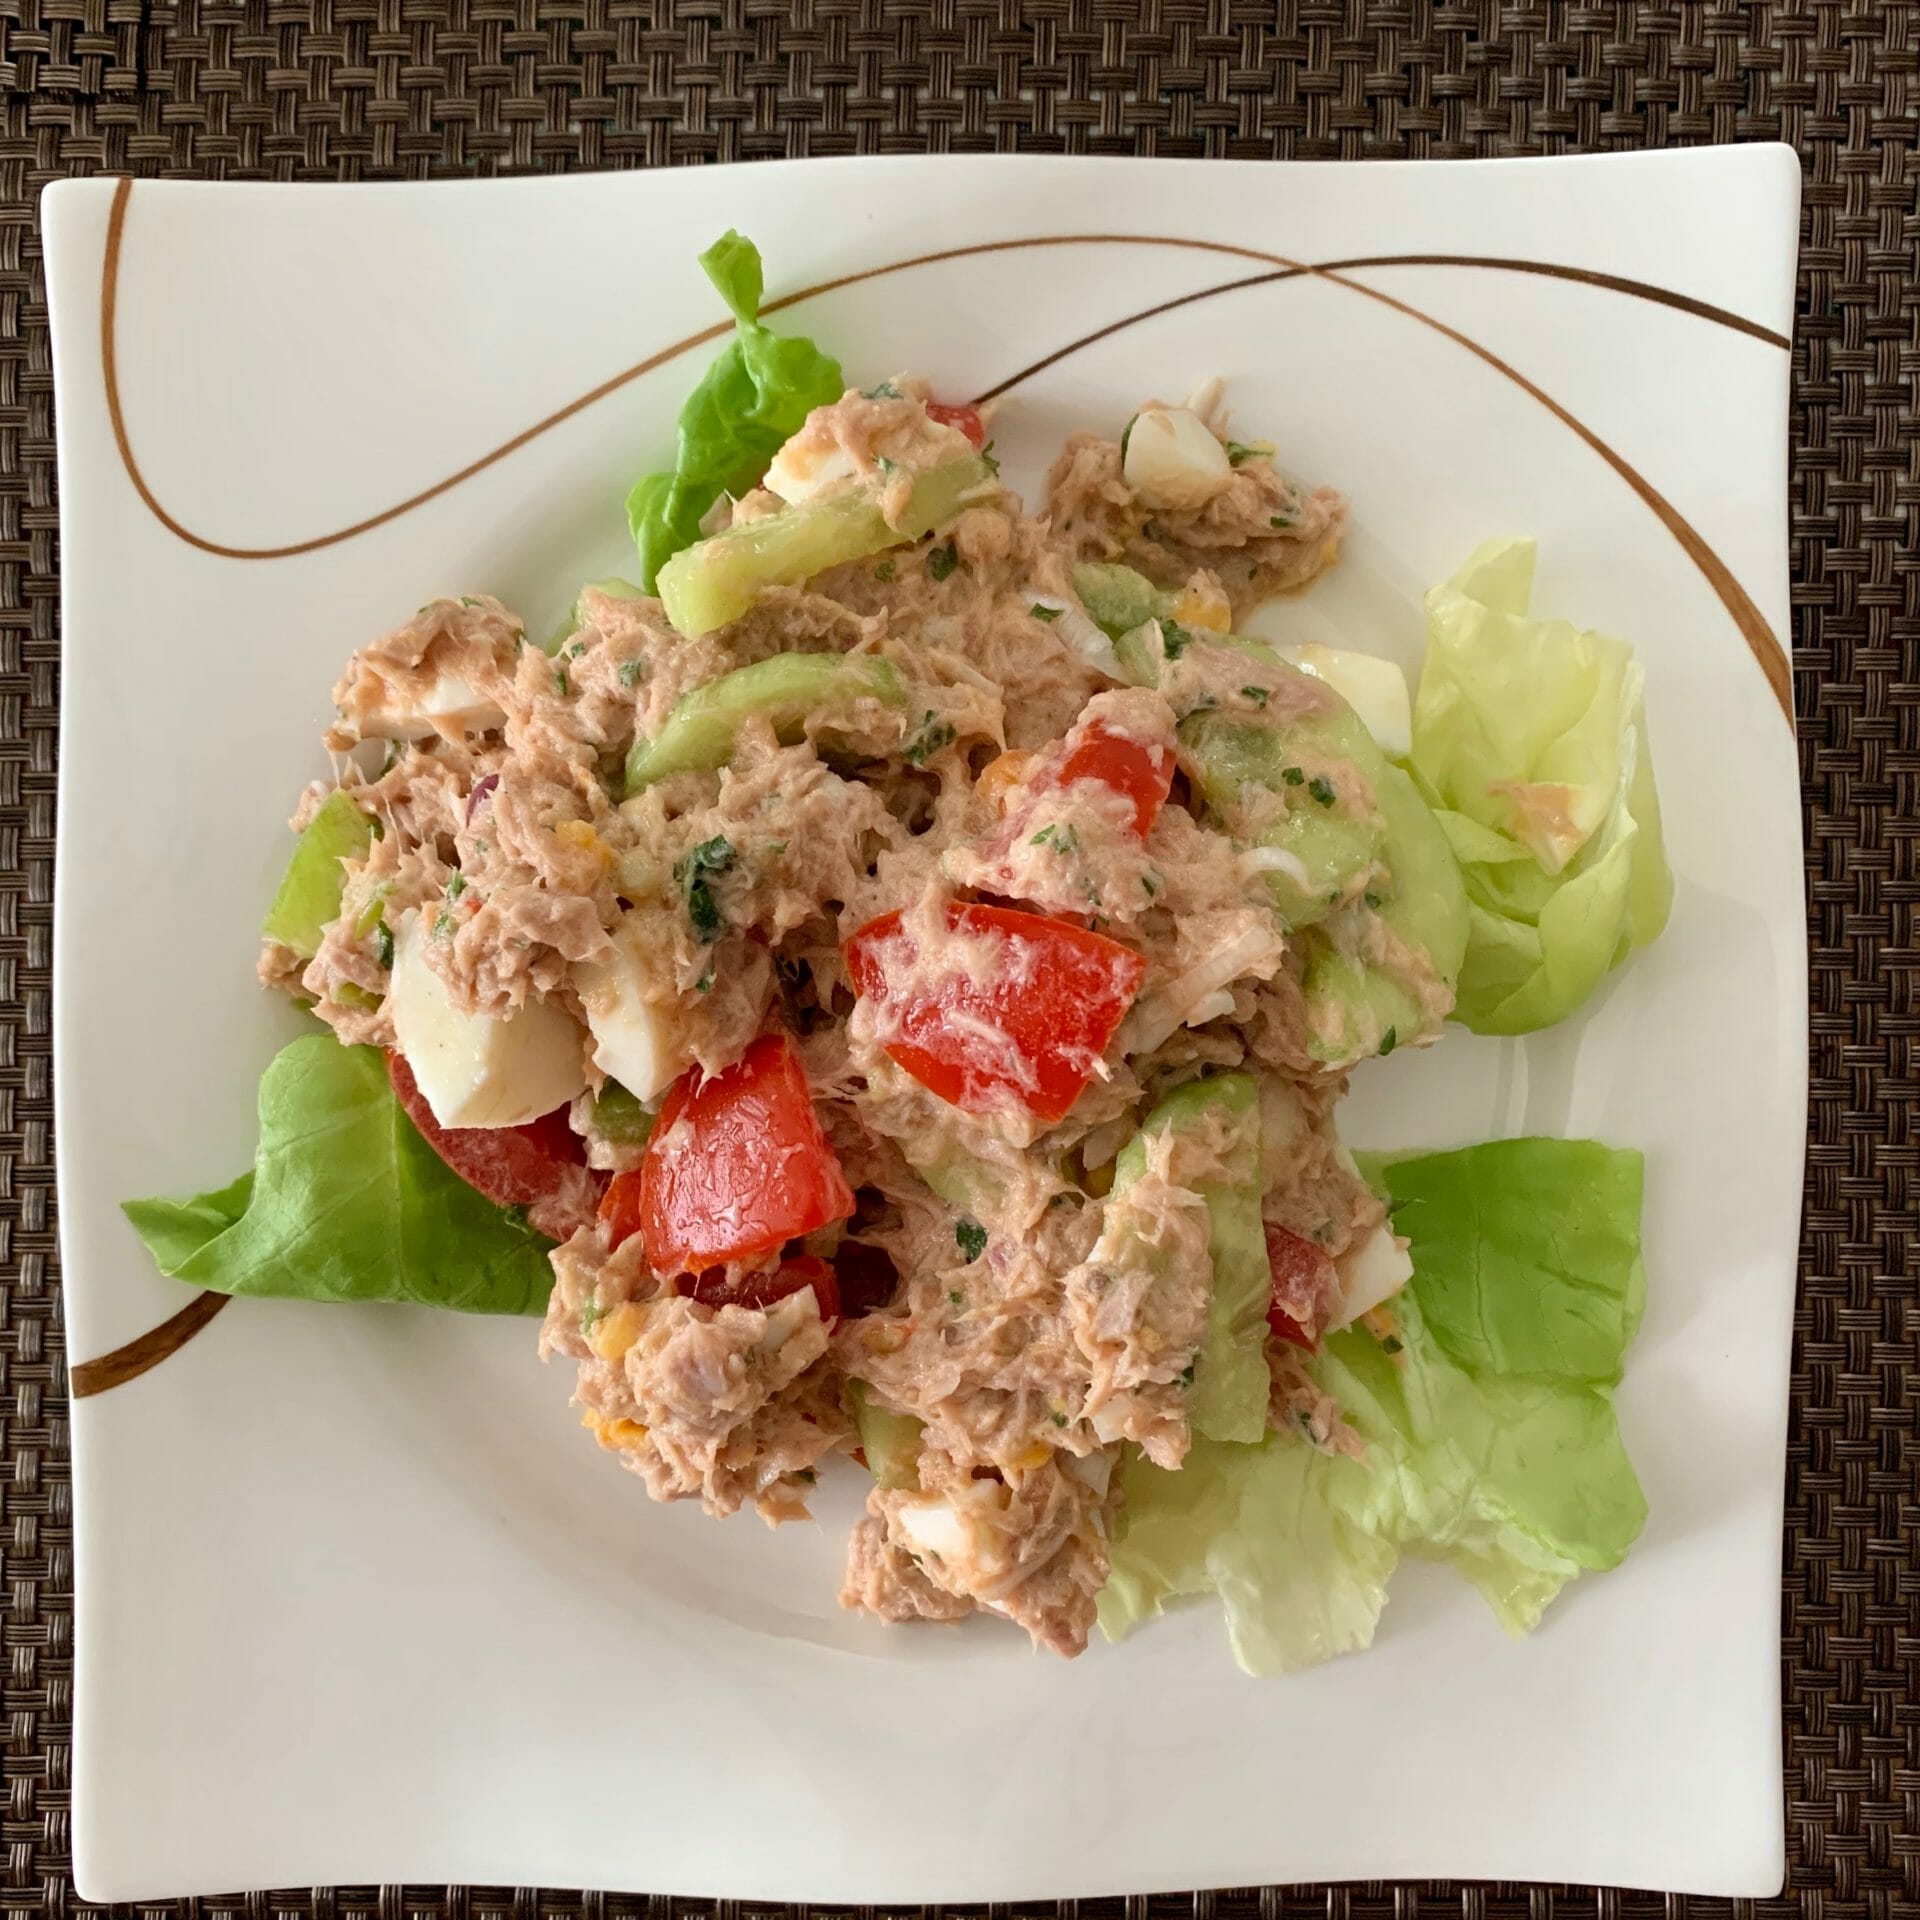 Tuna salad with mayo, eggs, tomatoes, cucumbers and lettuce